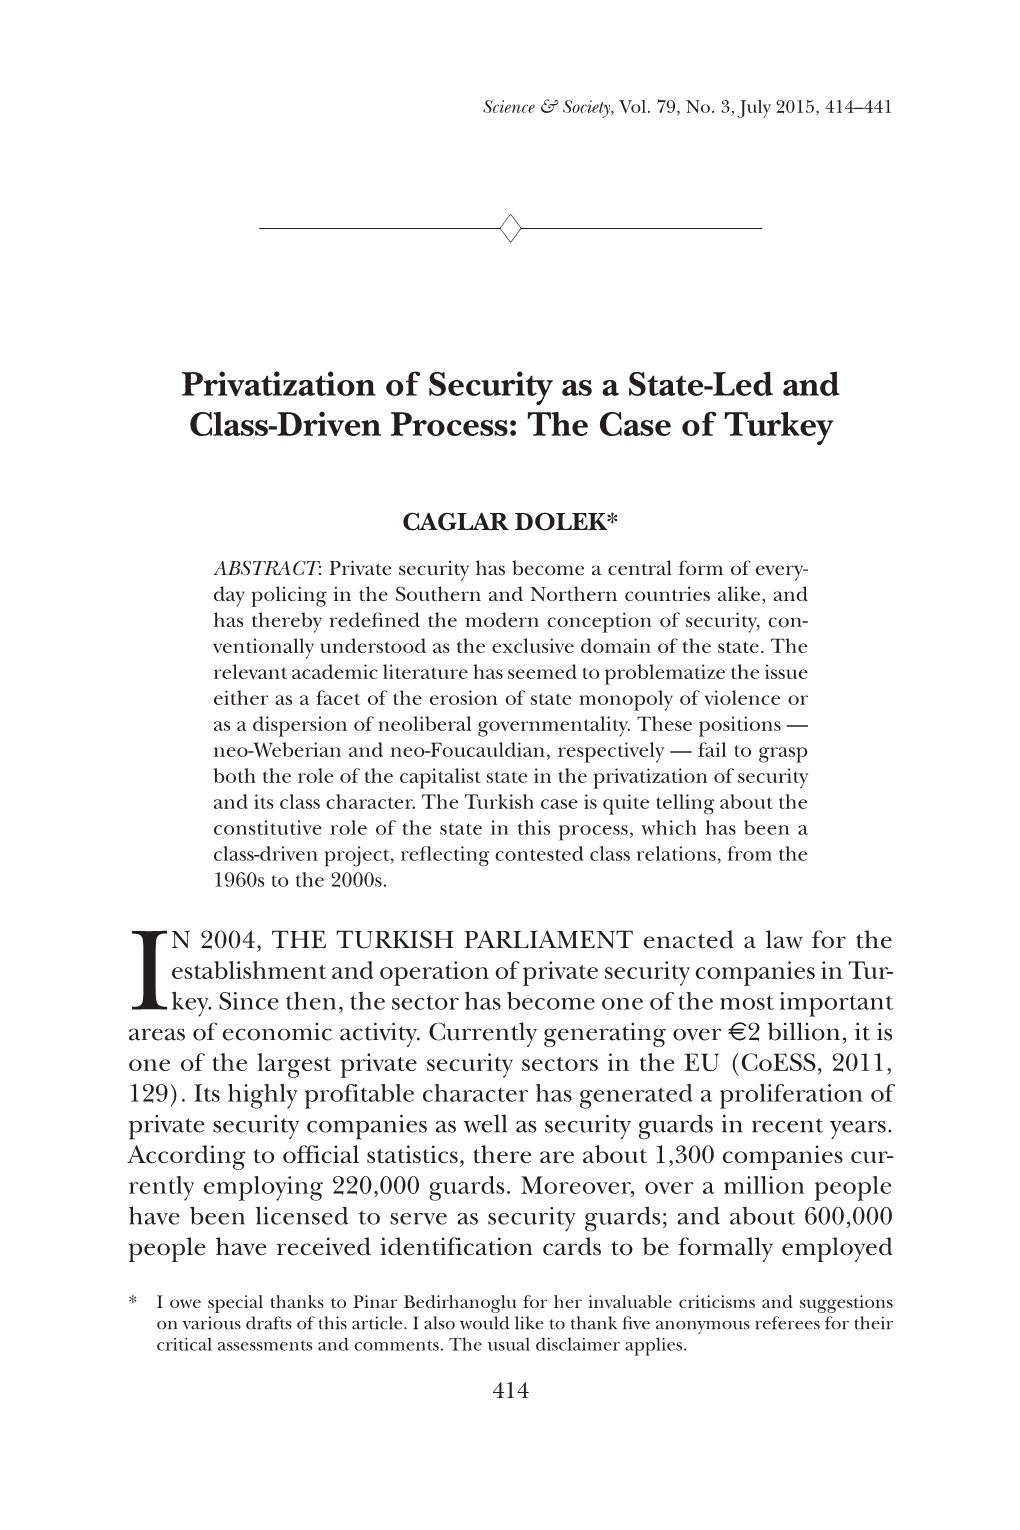 Privatization of Security As a State-Led and Class-Driven Process: the Case of Turkey